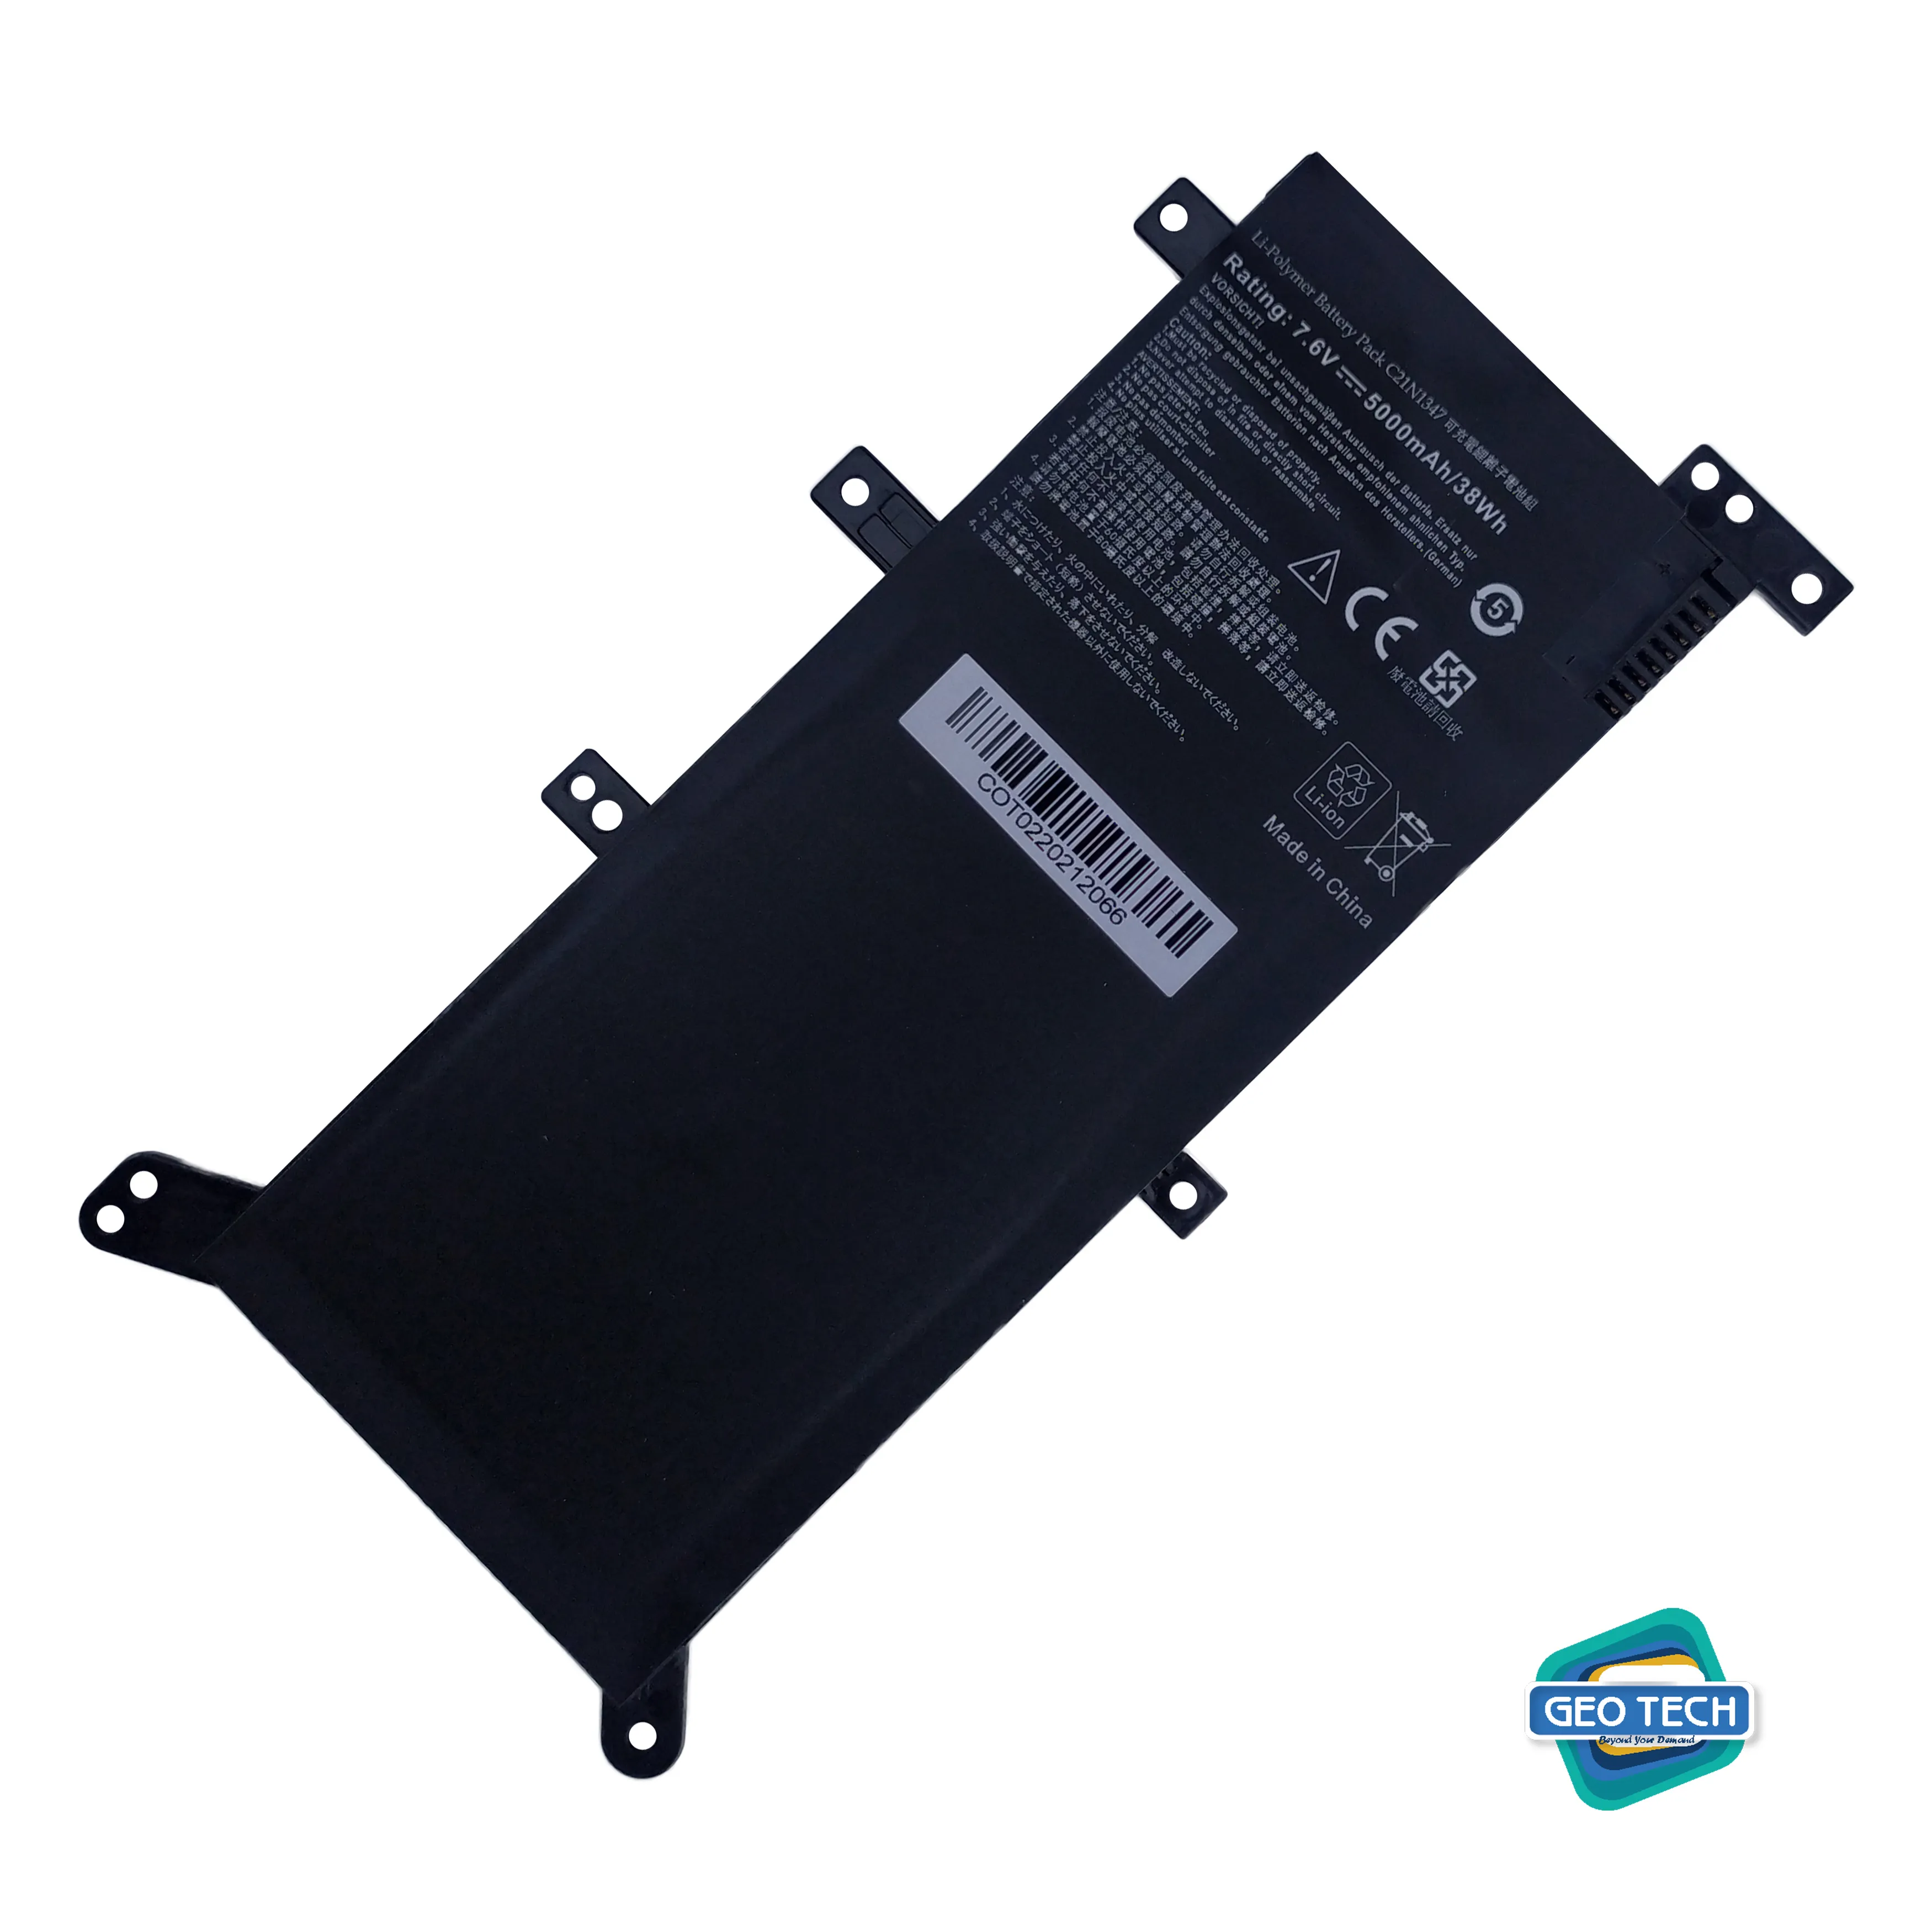 Replacement Battery ASUS X555LA for Asus X555 X555L X555LB X555LD X555LF X555LI X555LJ X555LN X555LP Series C21N1347